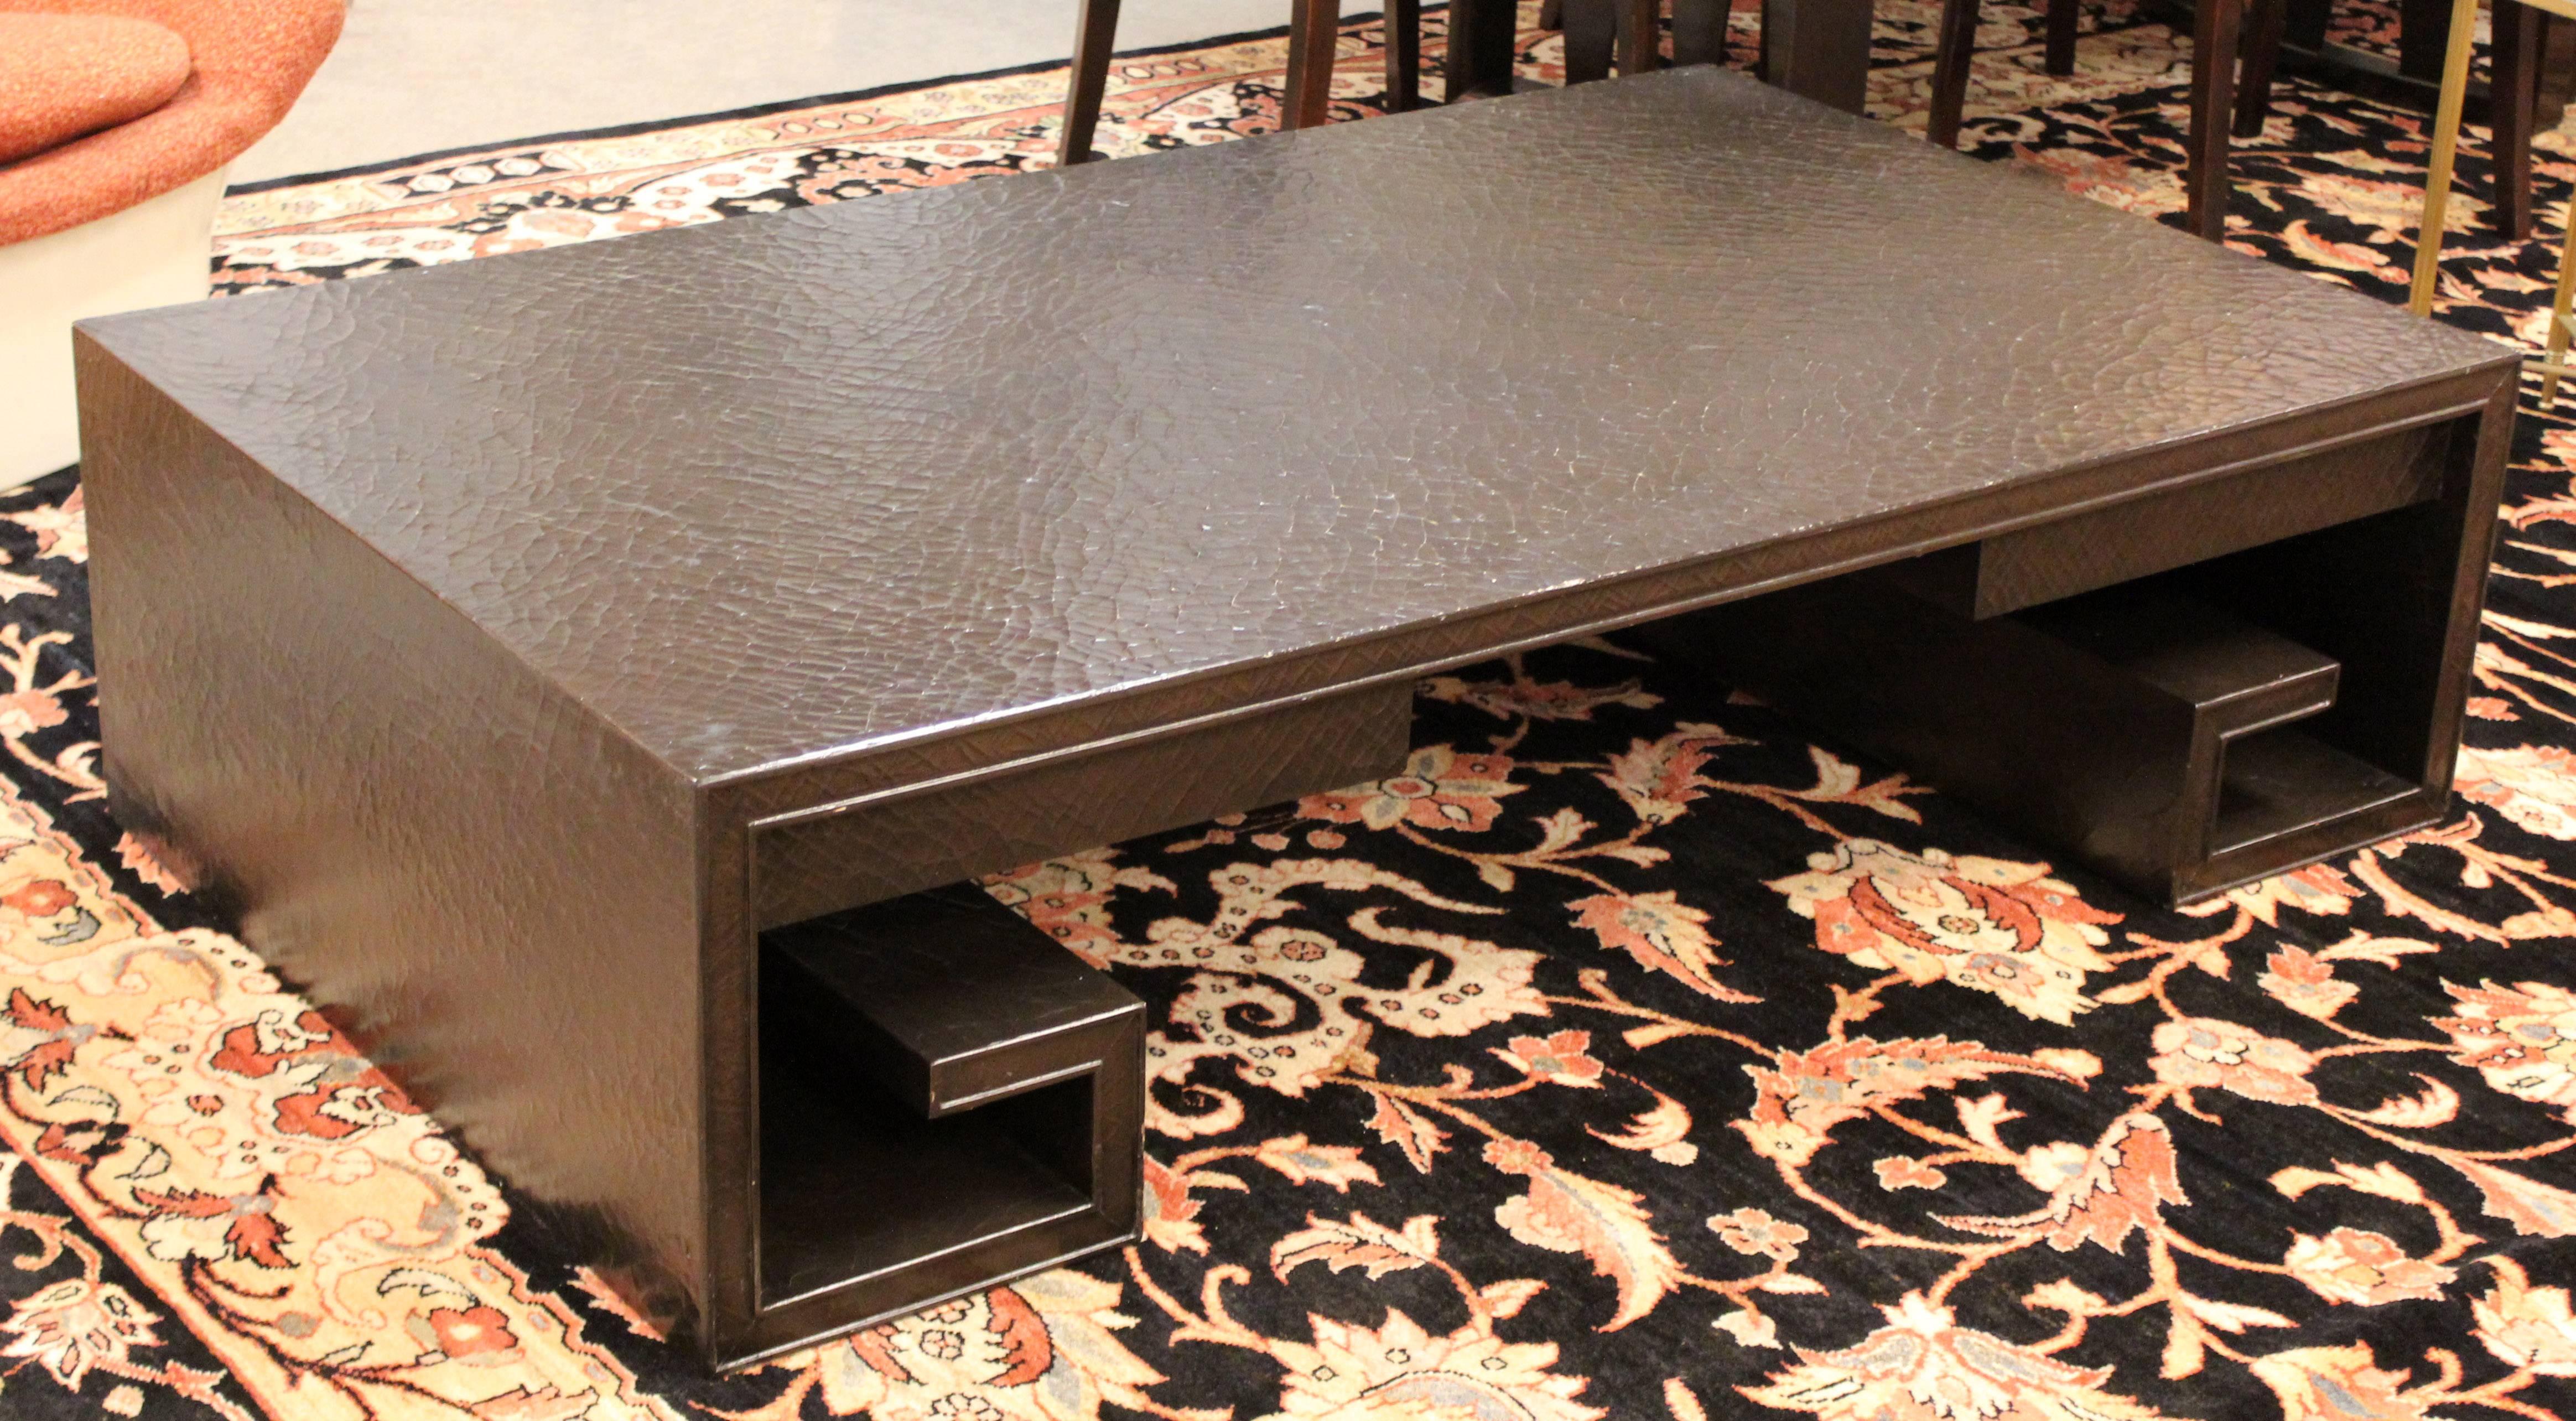 American Mid-Century Modern Crackle Lacquer Scroll Coffee Table Thomas Pheasant for Baker